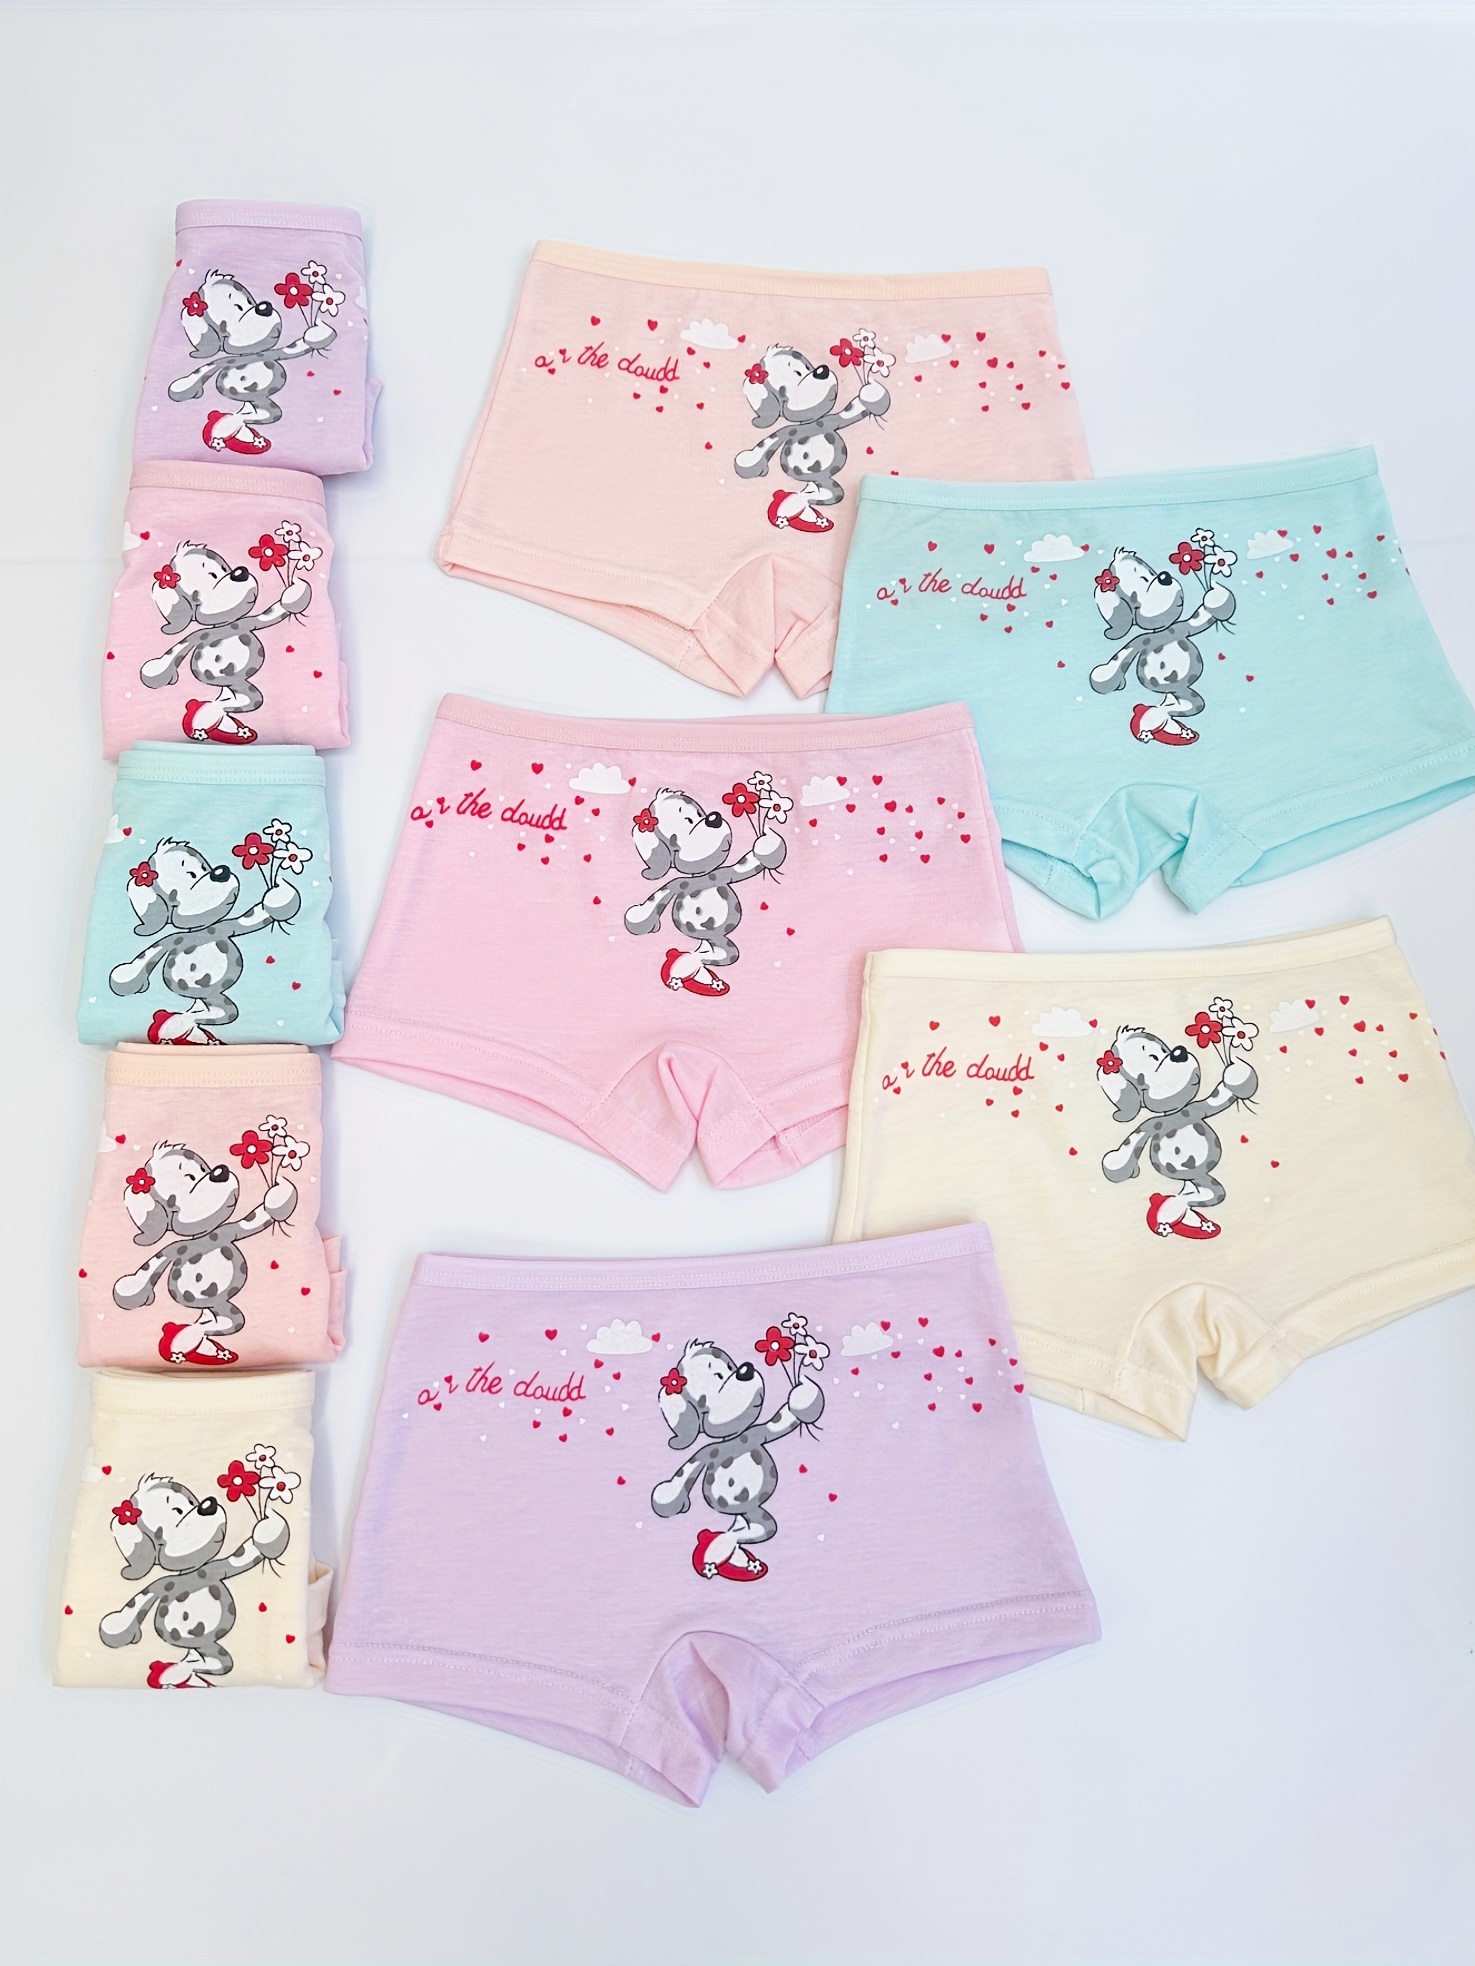 Women's cotton boxers with heart